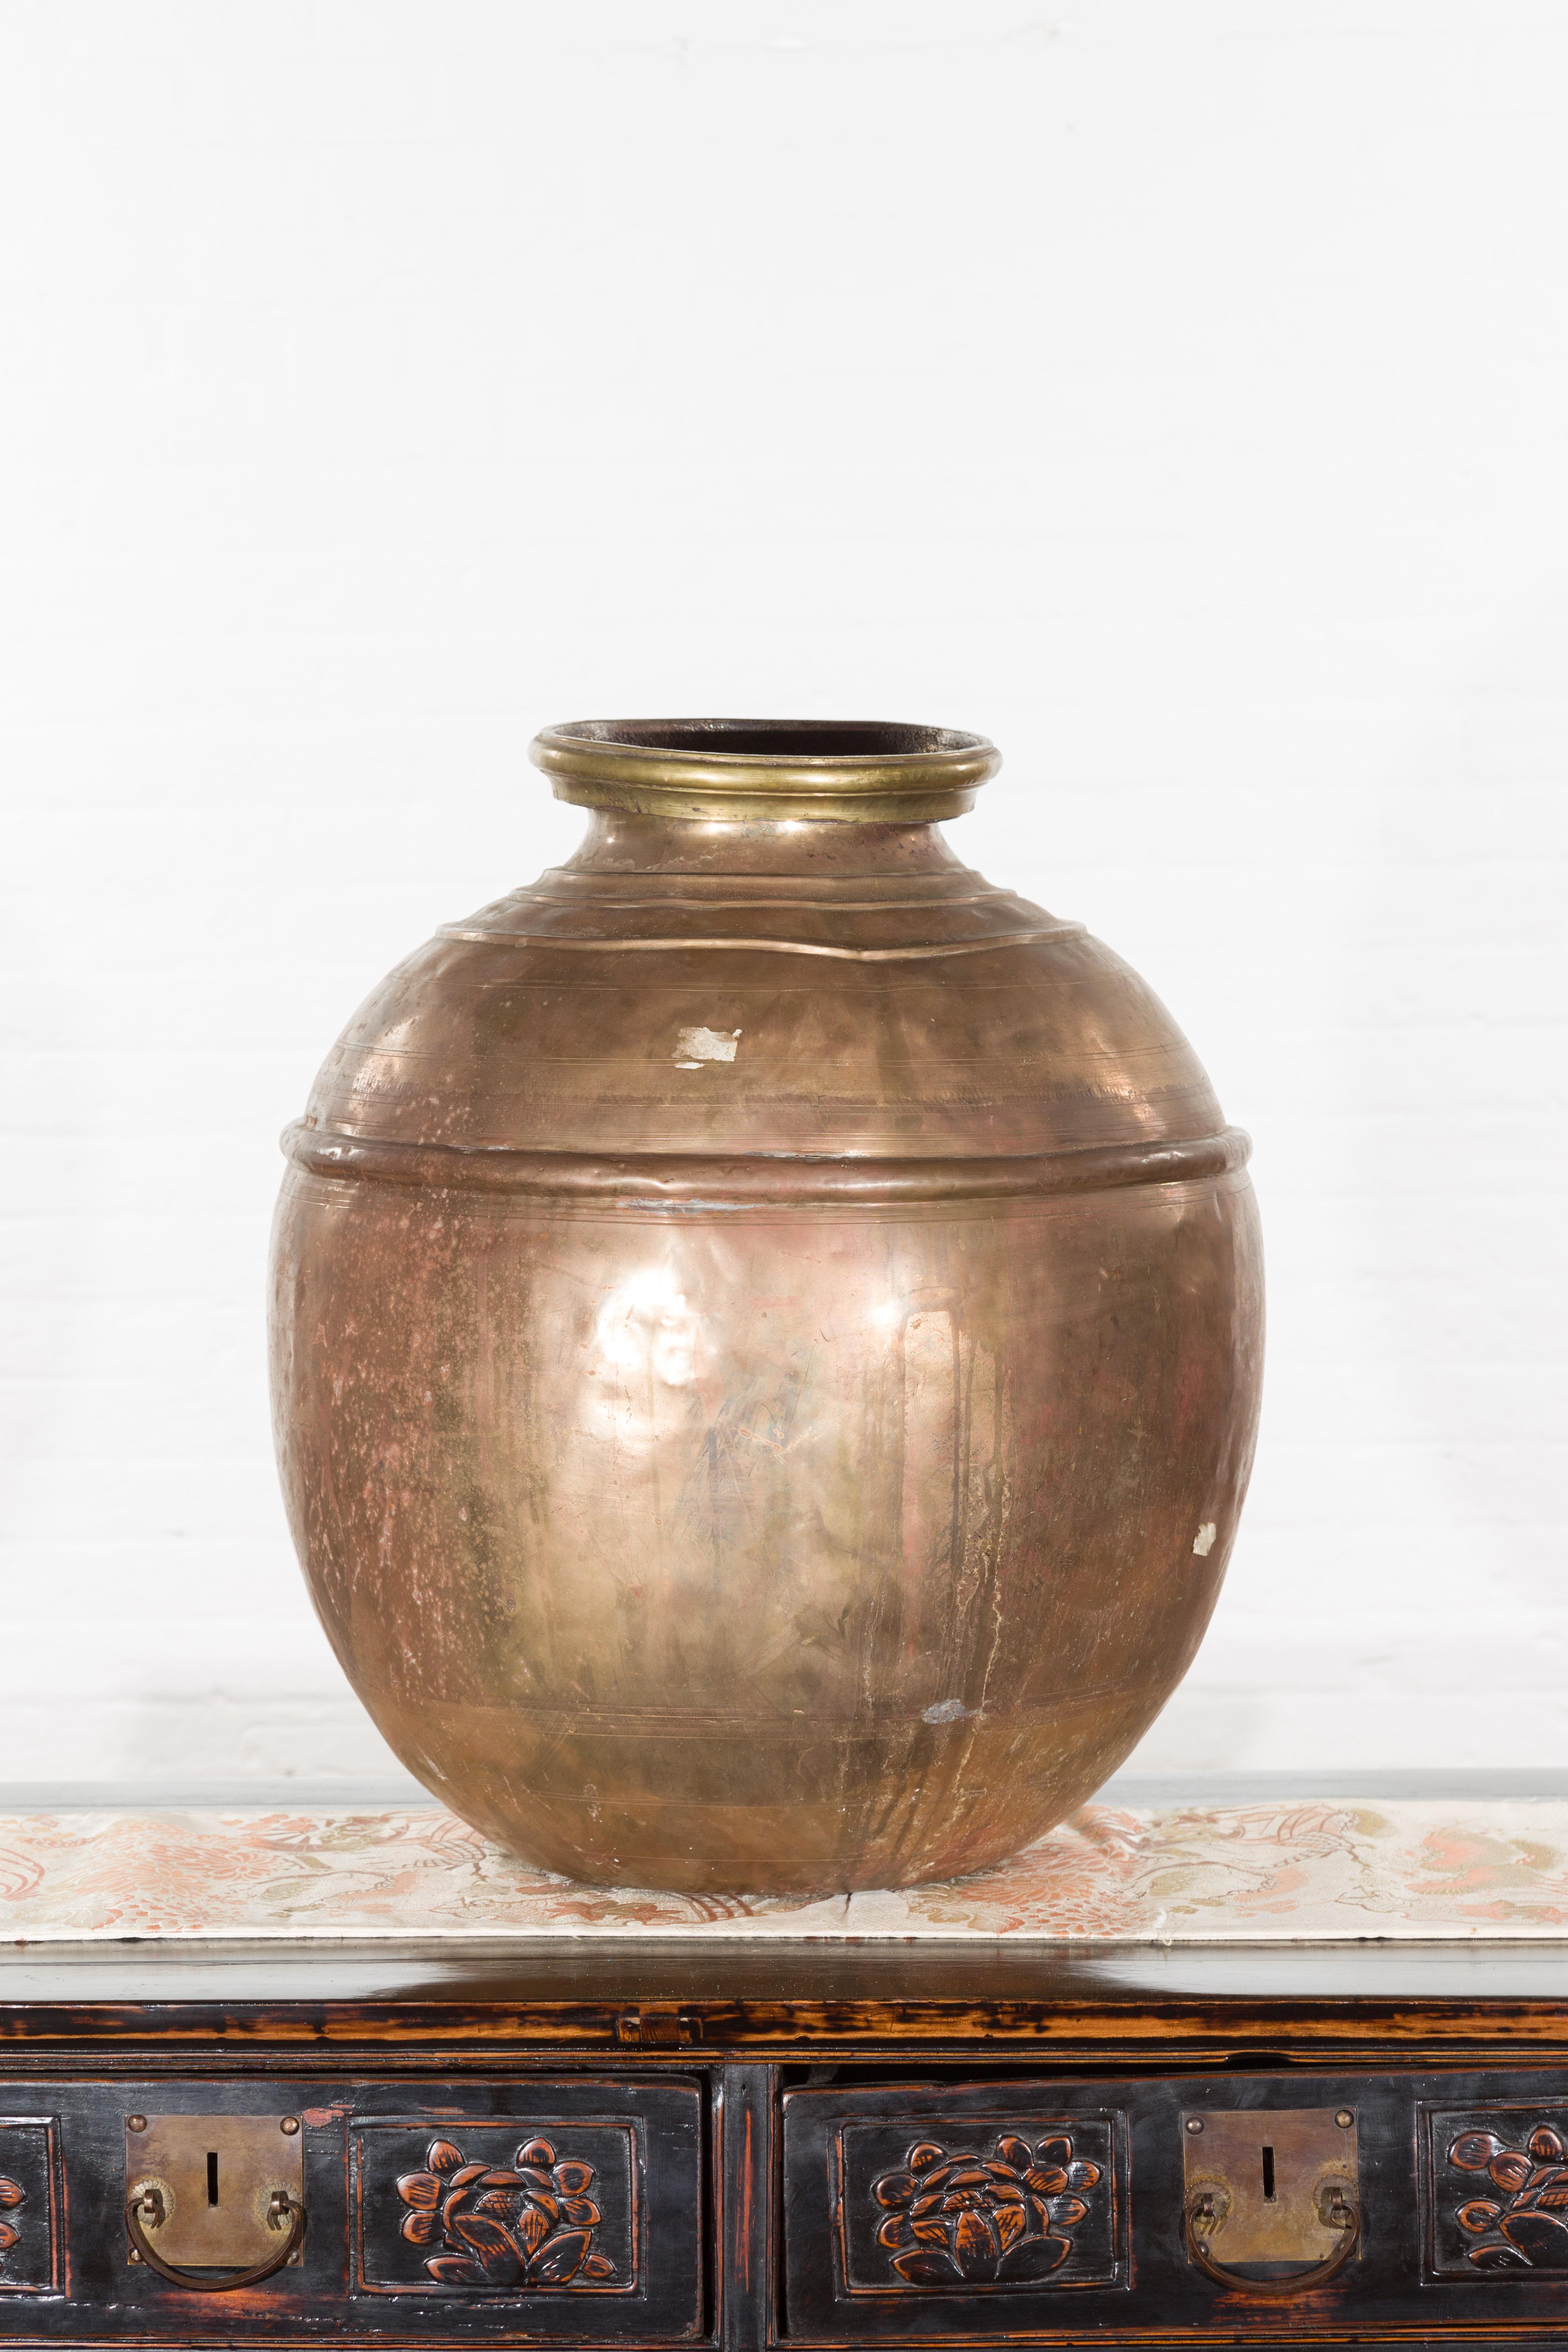 Indian Vintage Brass Water Jar with Concentric Rings and Distressed Appearance 1